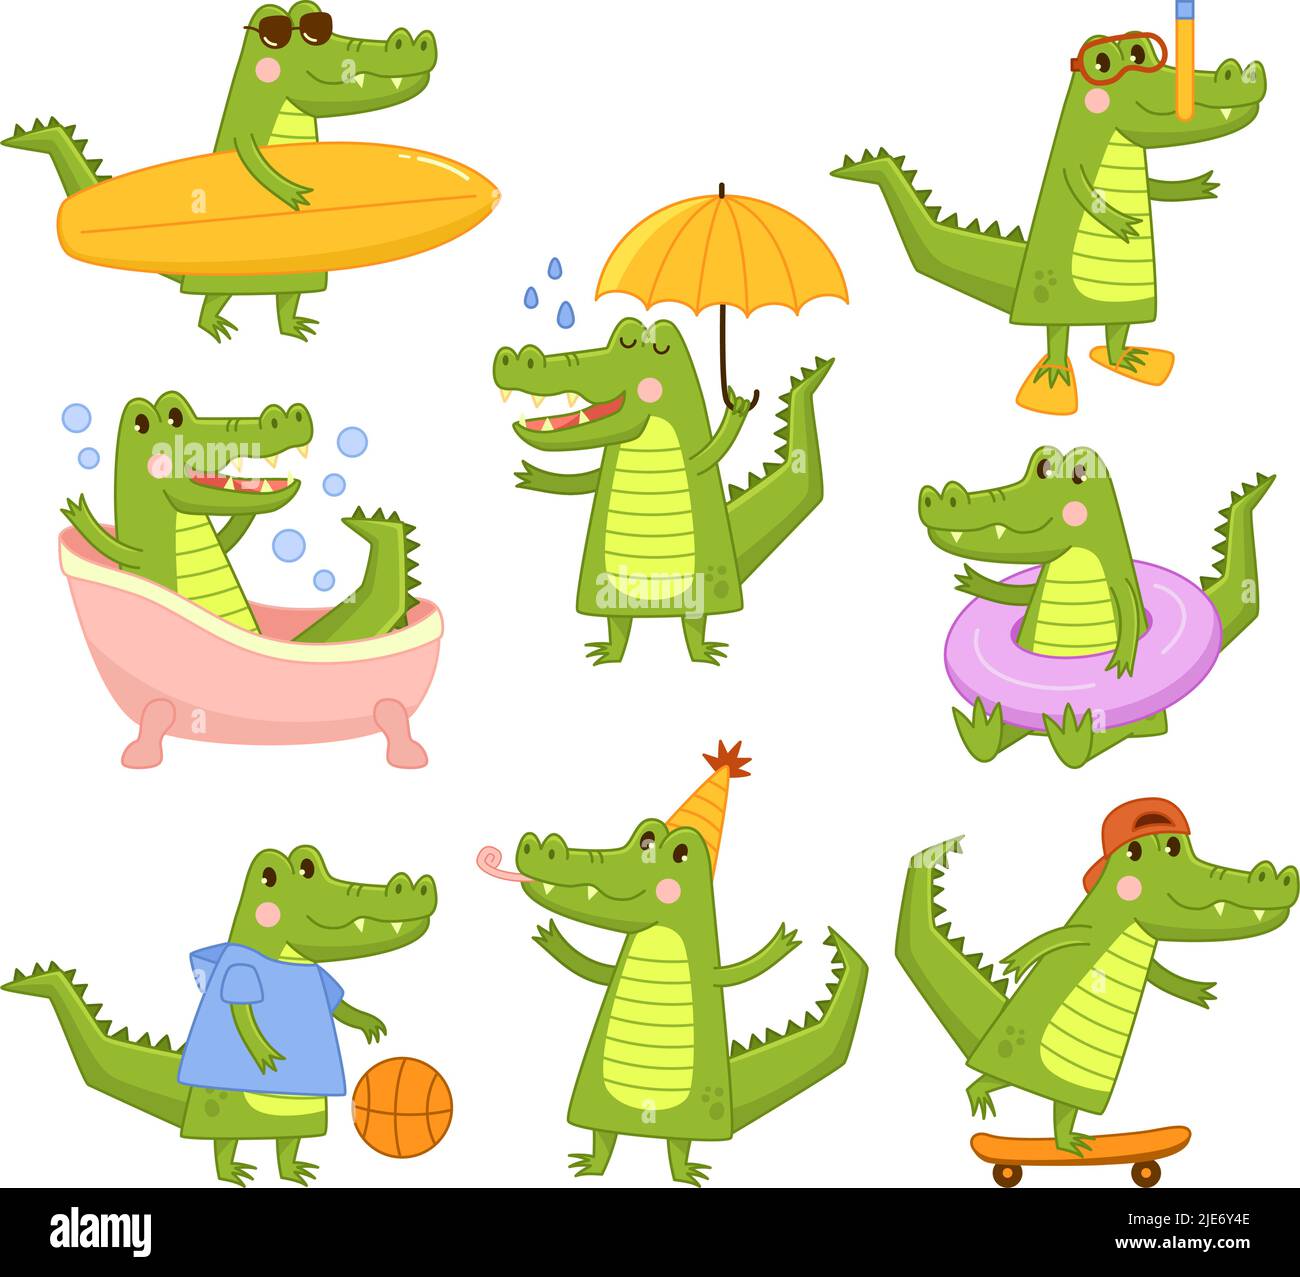 Cartoon alligator. Cool green crocodile surfer and diver, takes bath and skateboarding. Mascot in different activities vector illustration set Stock Vector